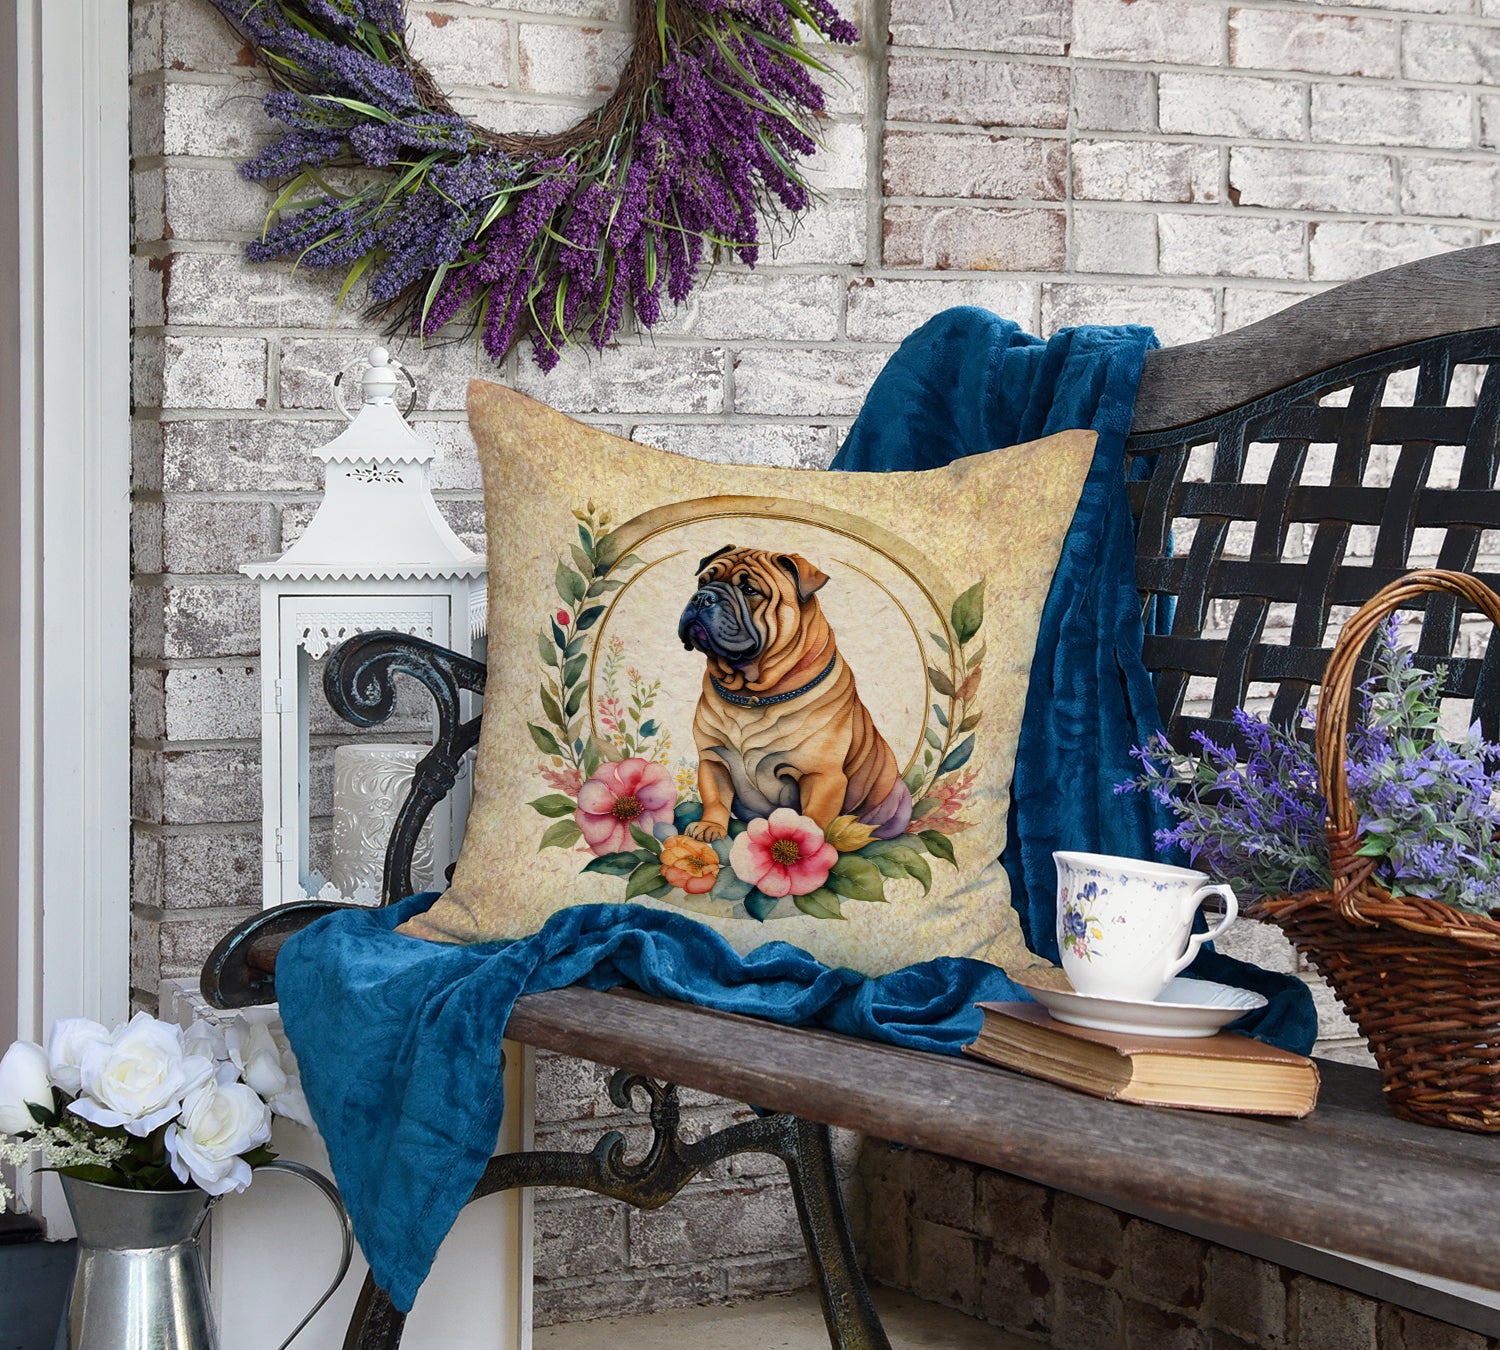 Shar Pei and Flowers Fabric Decorative Pillow